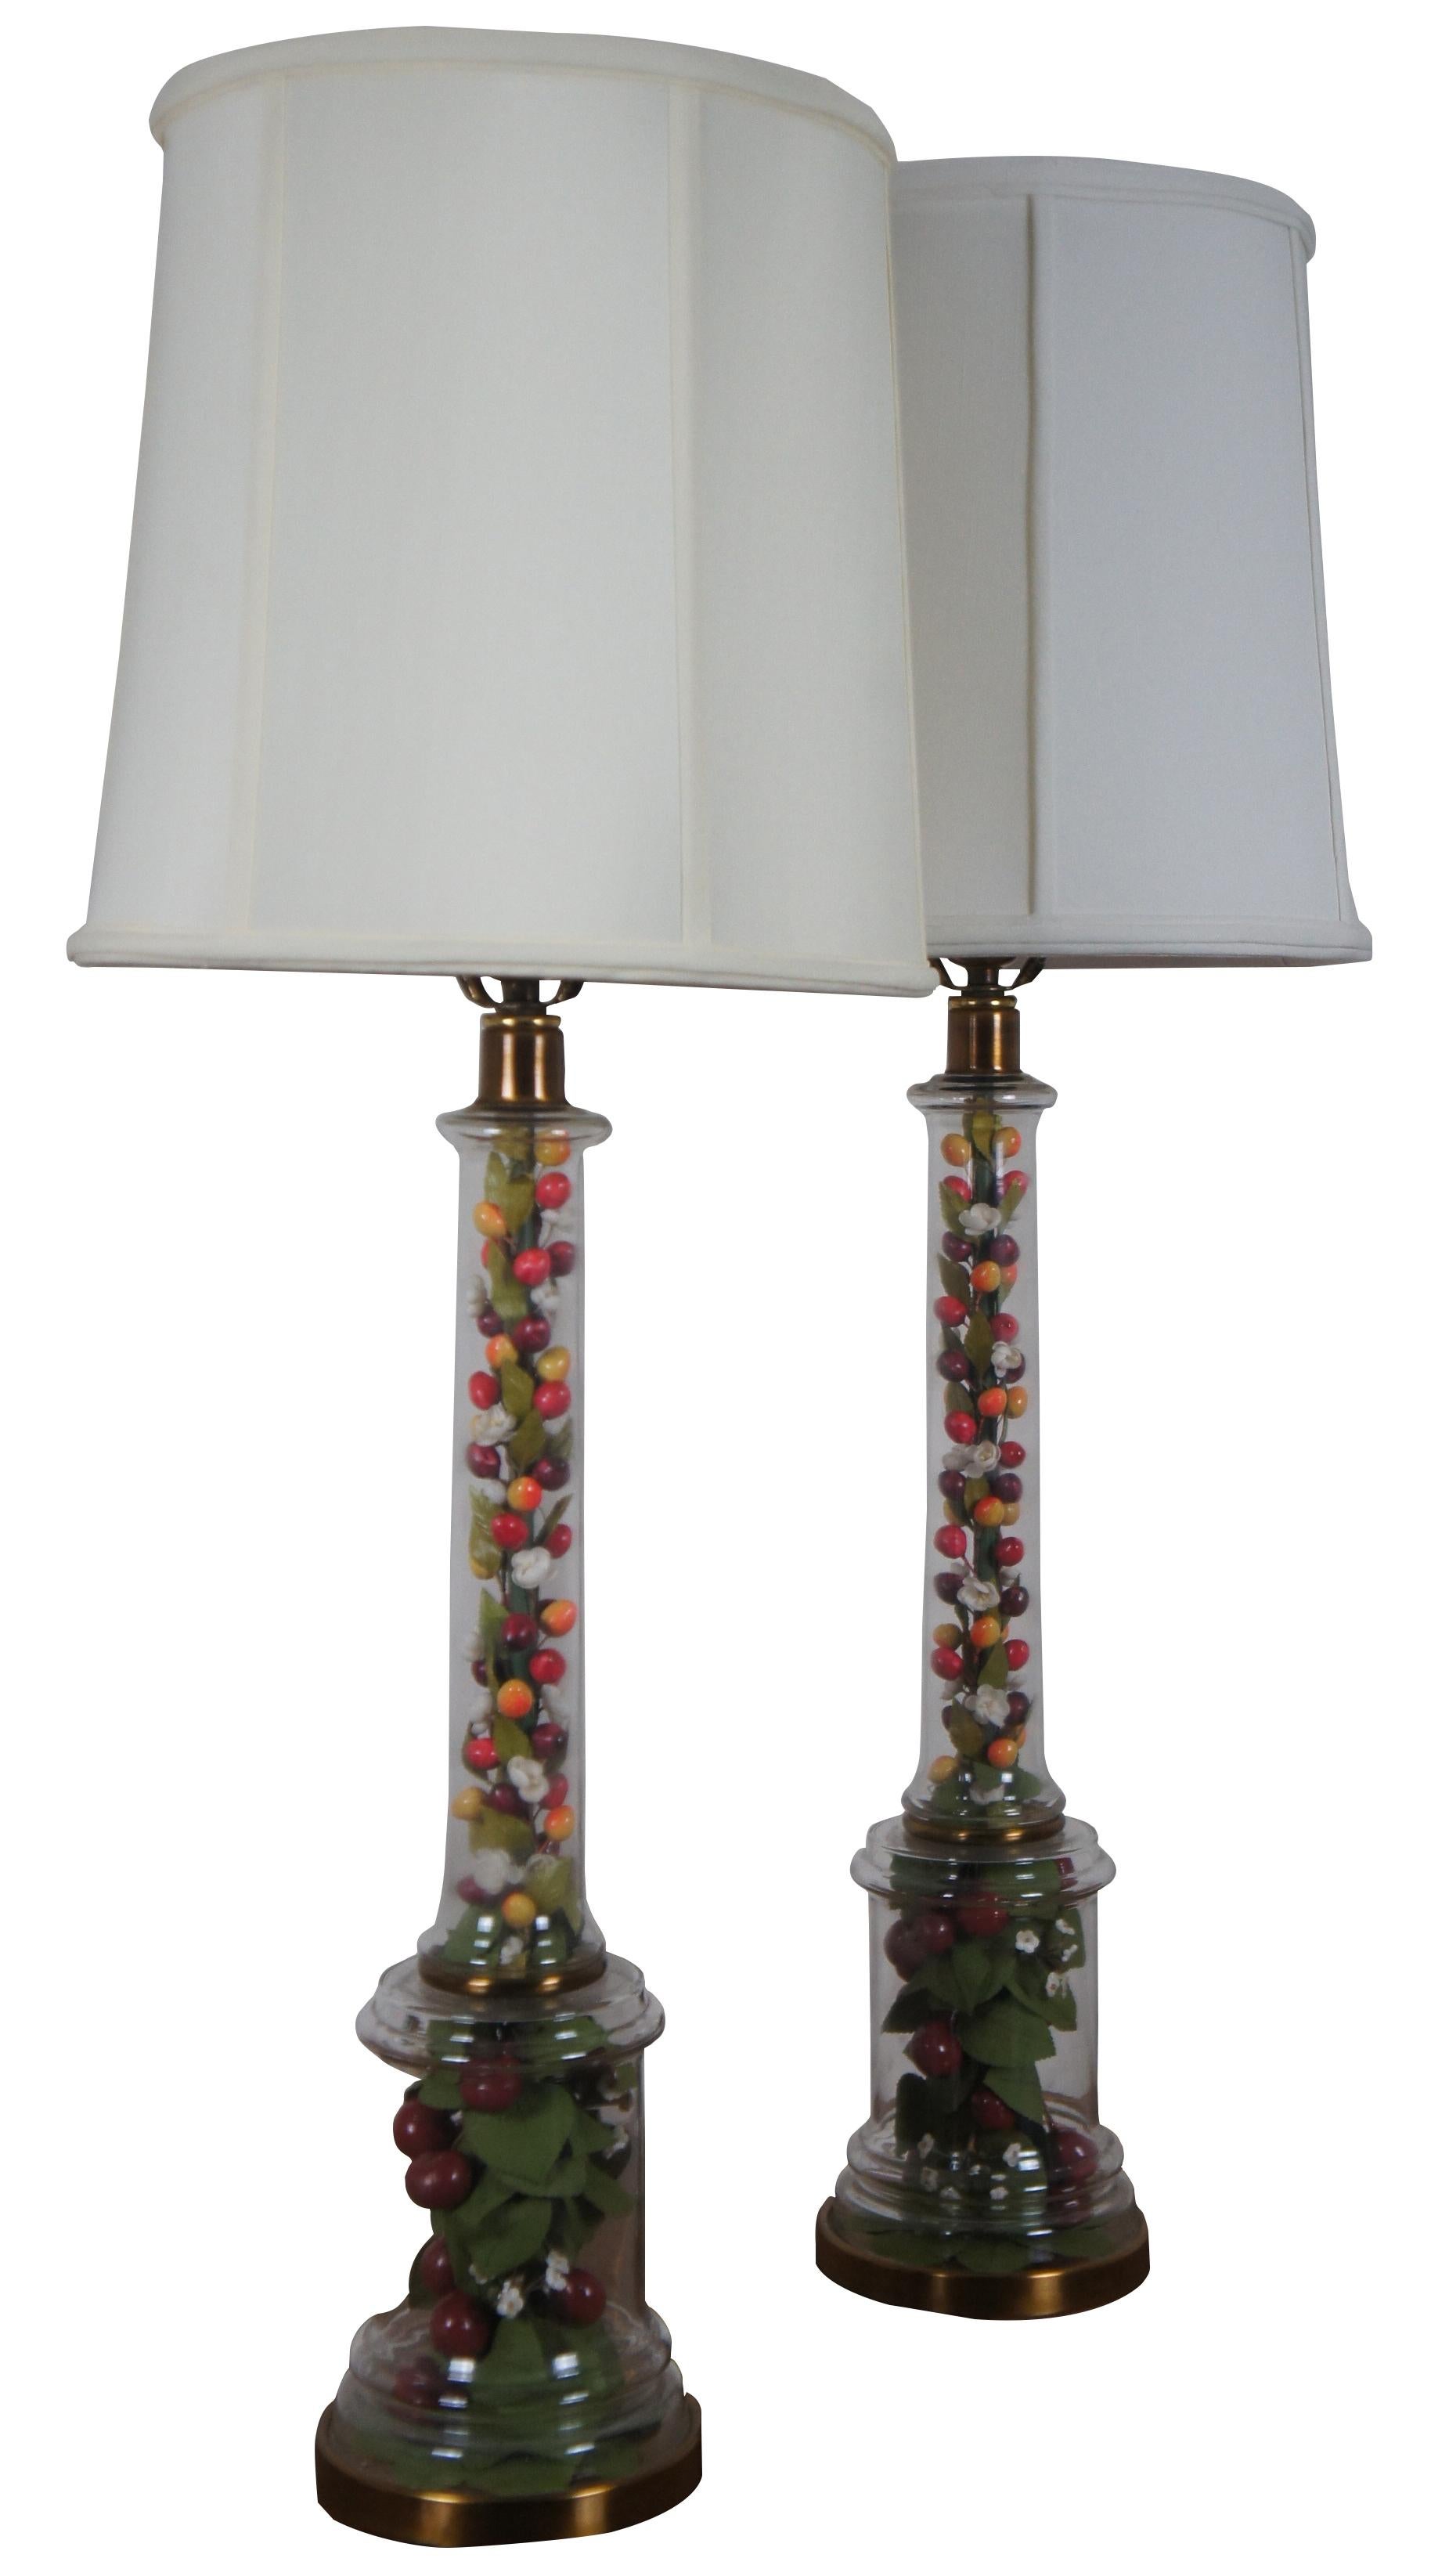 Mid century Frederick Cooper brass and glass table lamp pair featuring a clear glass column display filled with a festive arrangement of artificial flowers, leaves, fruits and berries.

Measures: 5.75” x 34.5” / Shade - 12.25” x 12.25” (Diameter x